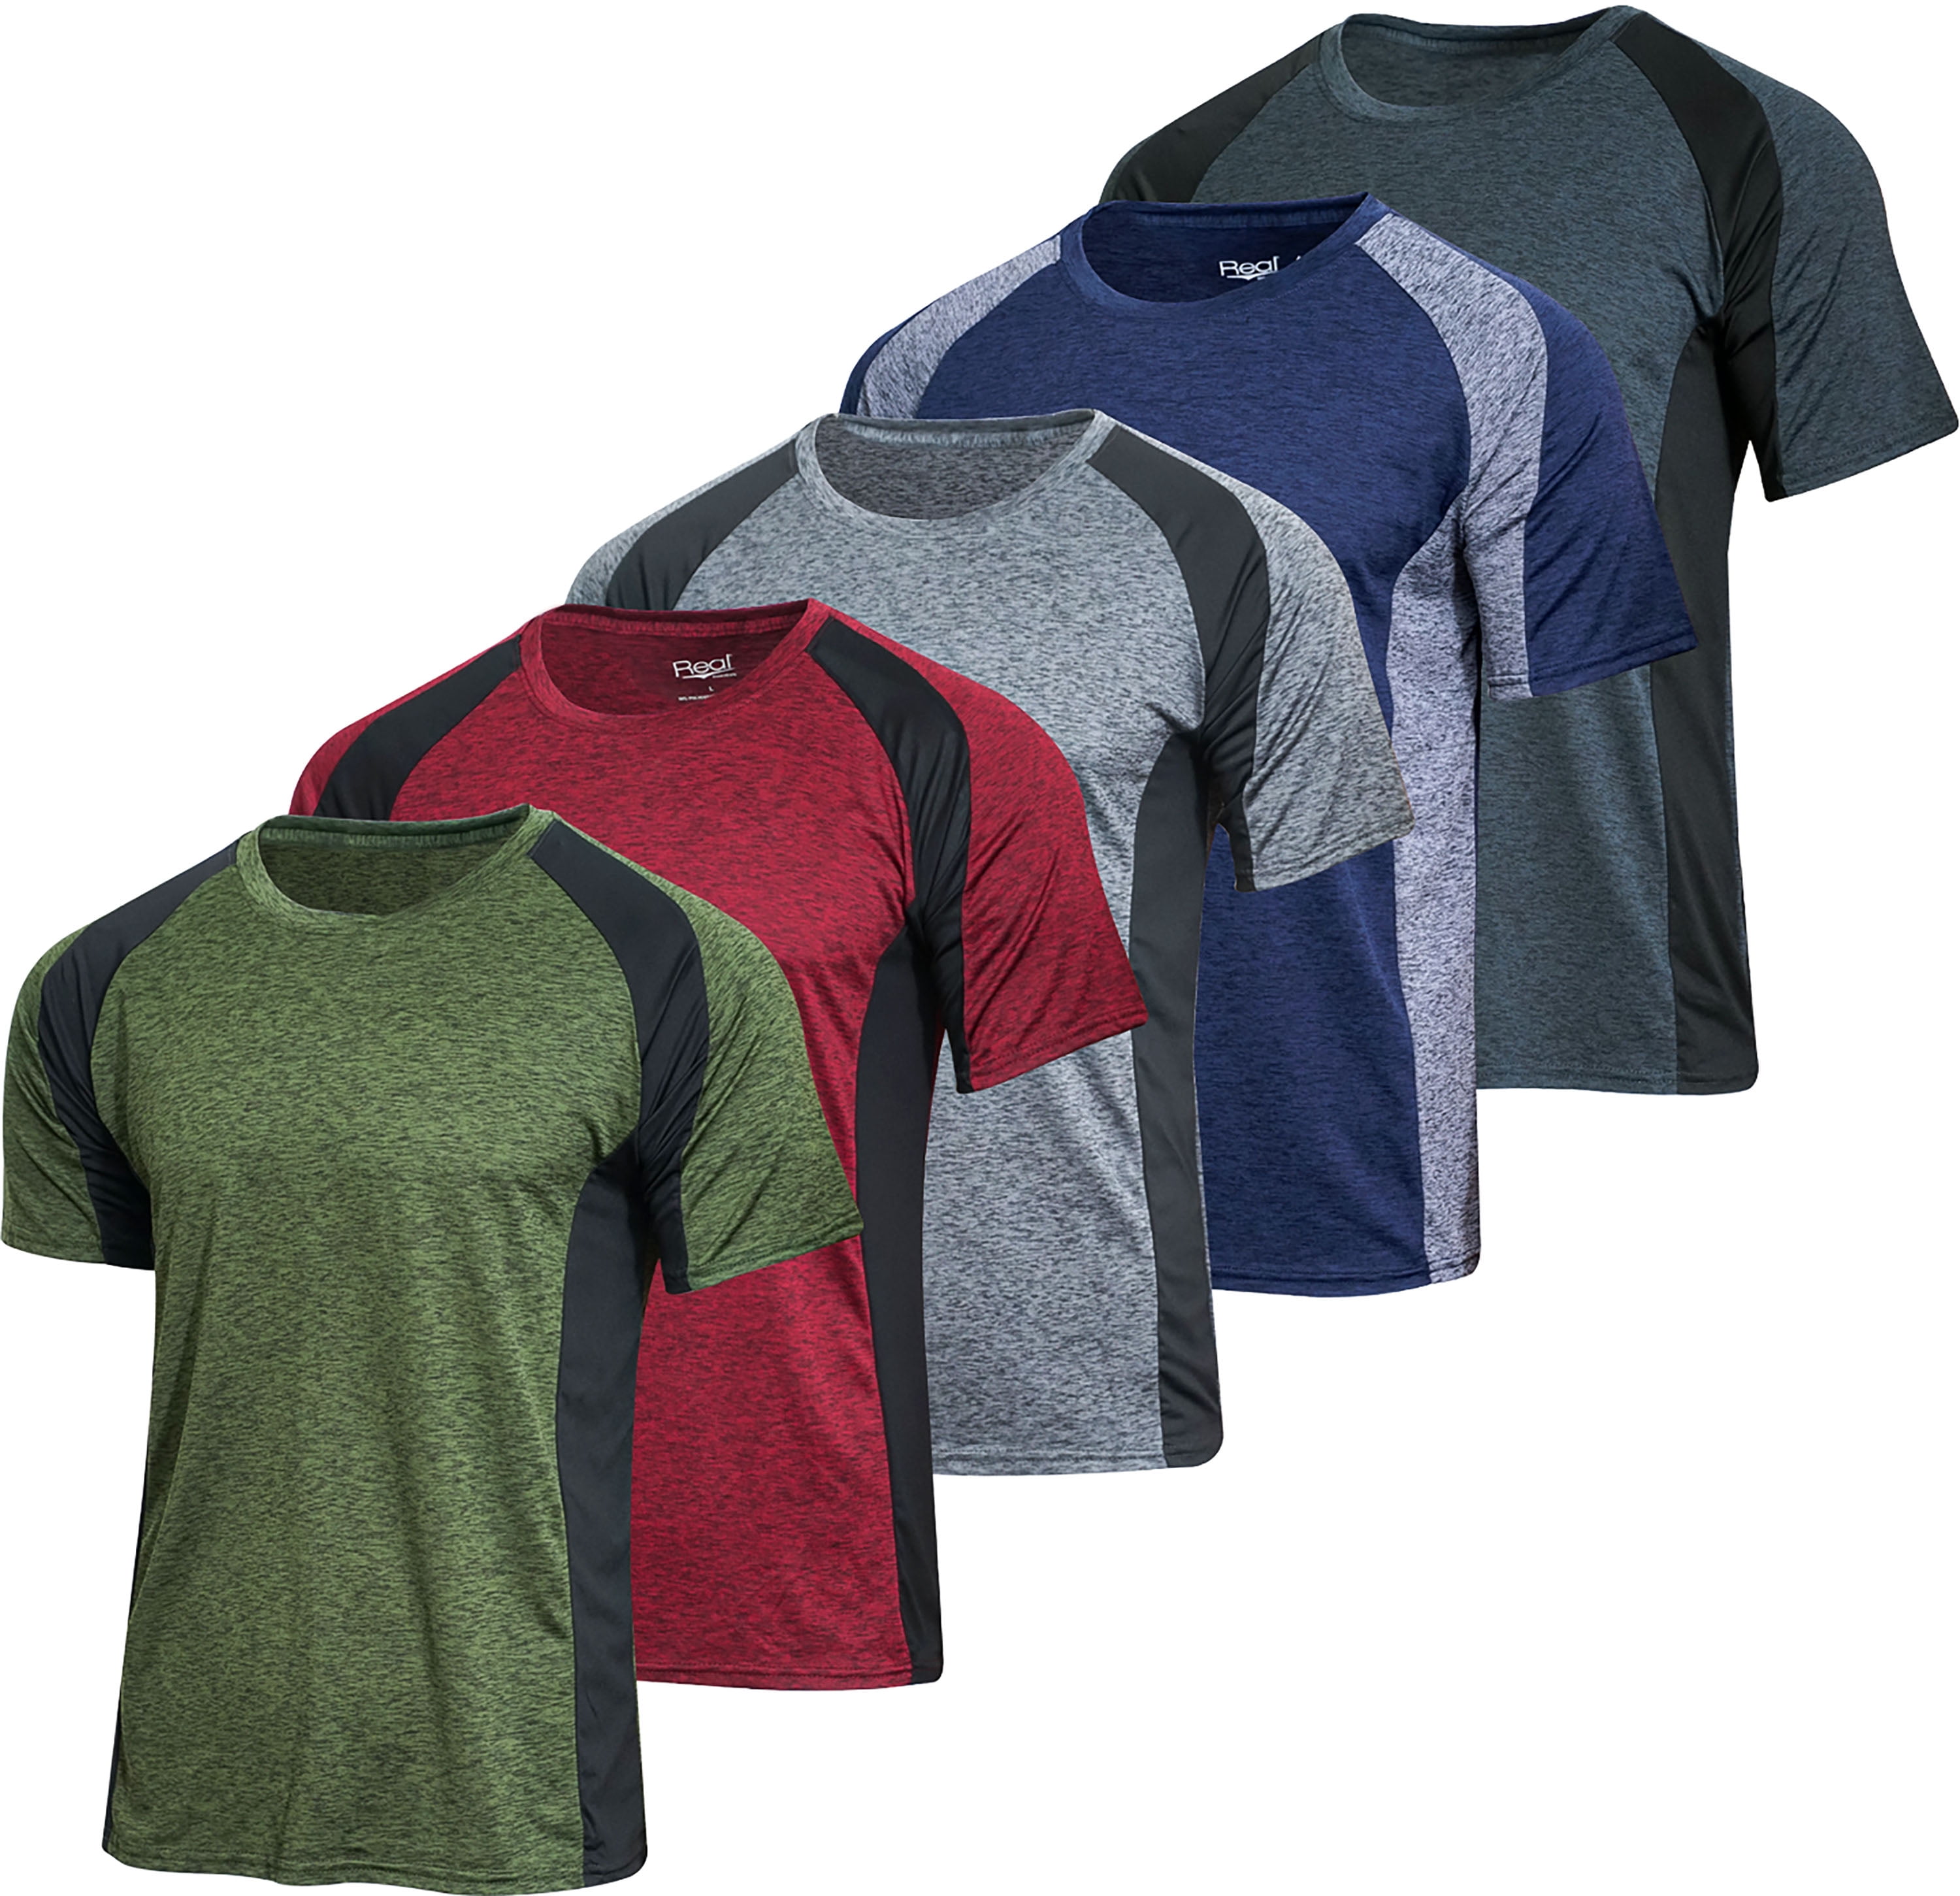 5 Pack Men’s Dry-Fit Moisture Wicking Active Athletic Performance Crew T-Shirt